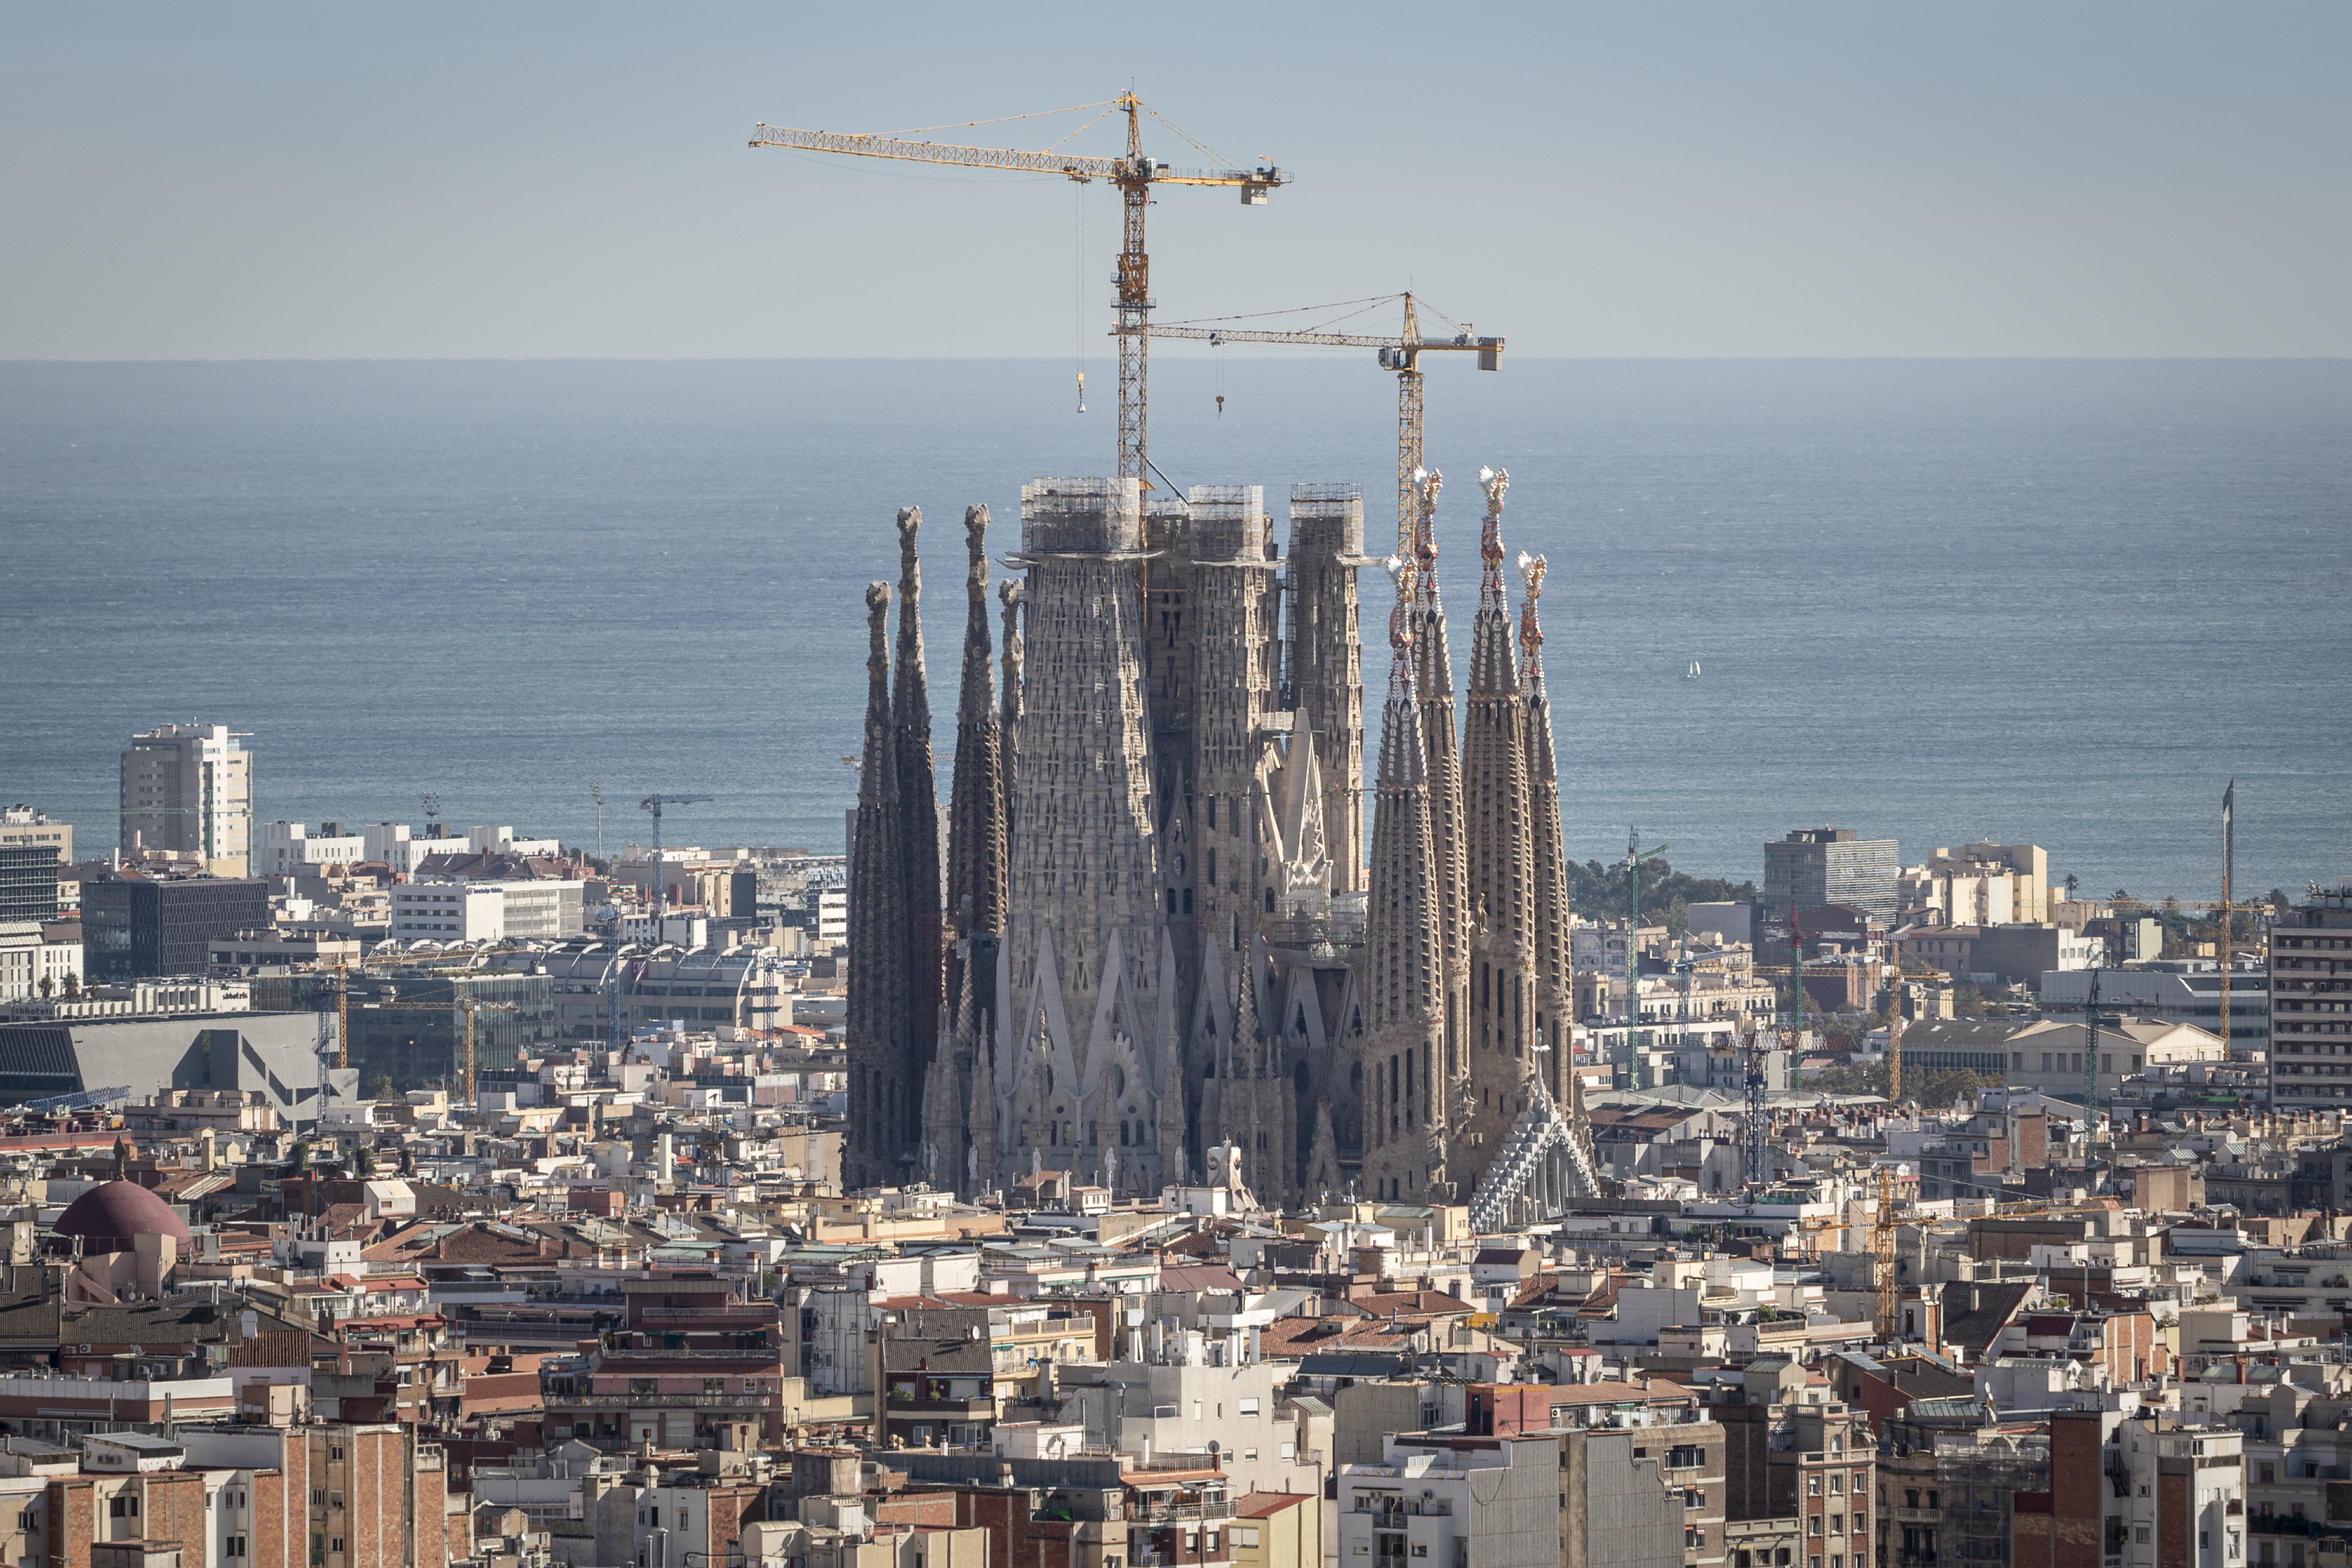 BARCELONA TIME tickets to visit Temple in October, sold out